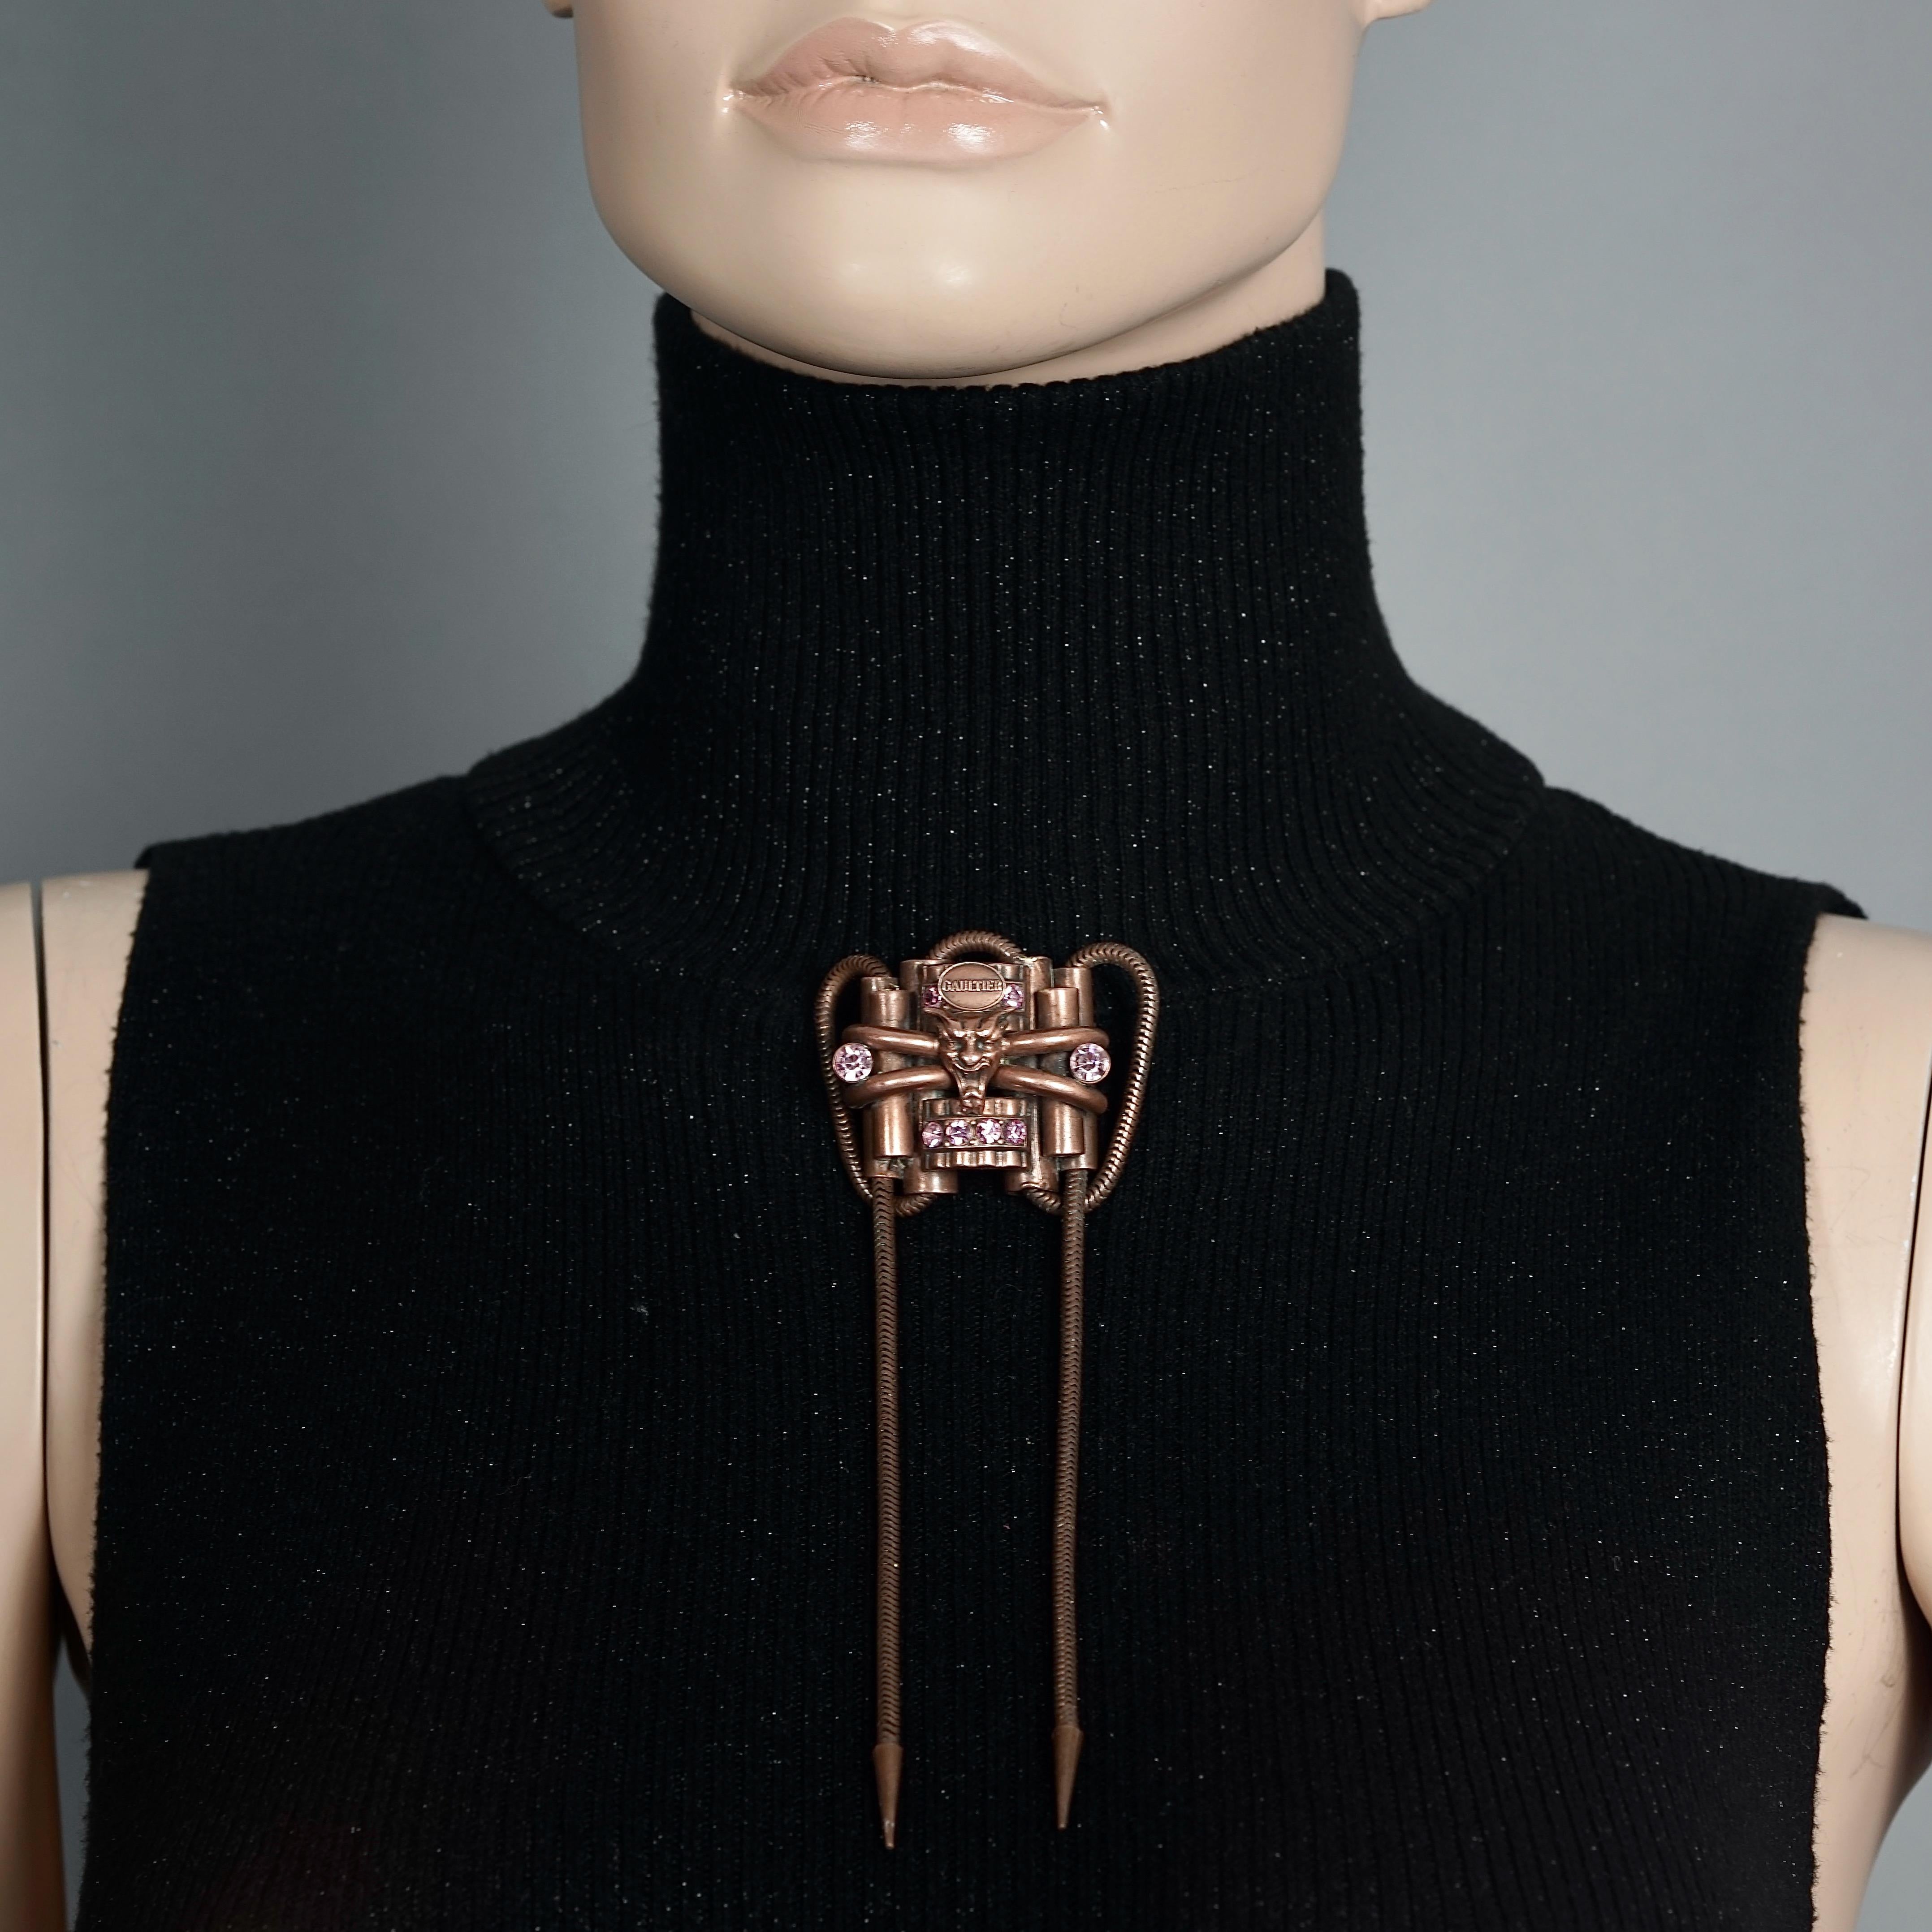 Vintage JEAN PAUL GAULTIER Gargoyle Tubular Dangling Chain Gothic Brooch

Measurements:
Height: 5.90 inches (15 cm)
Width: 1.57 inches (4 cm)

Features:
- 100% Authentic JEAN PAUL GAULTIER.
- 3 dimensional gargoyle with pink rhinestones, dangling